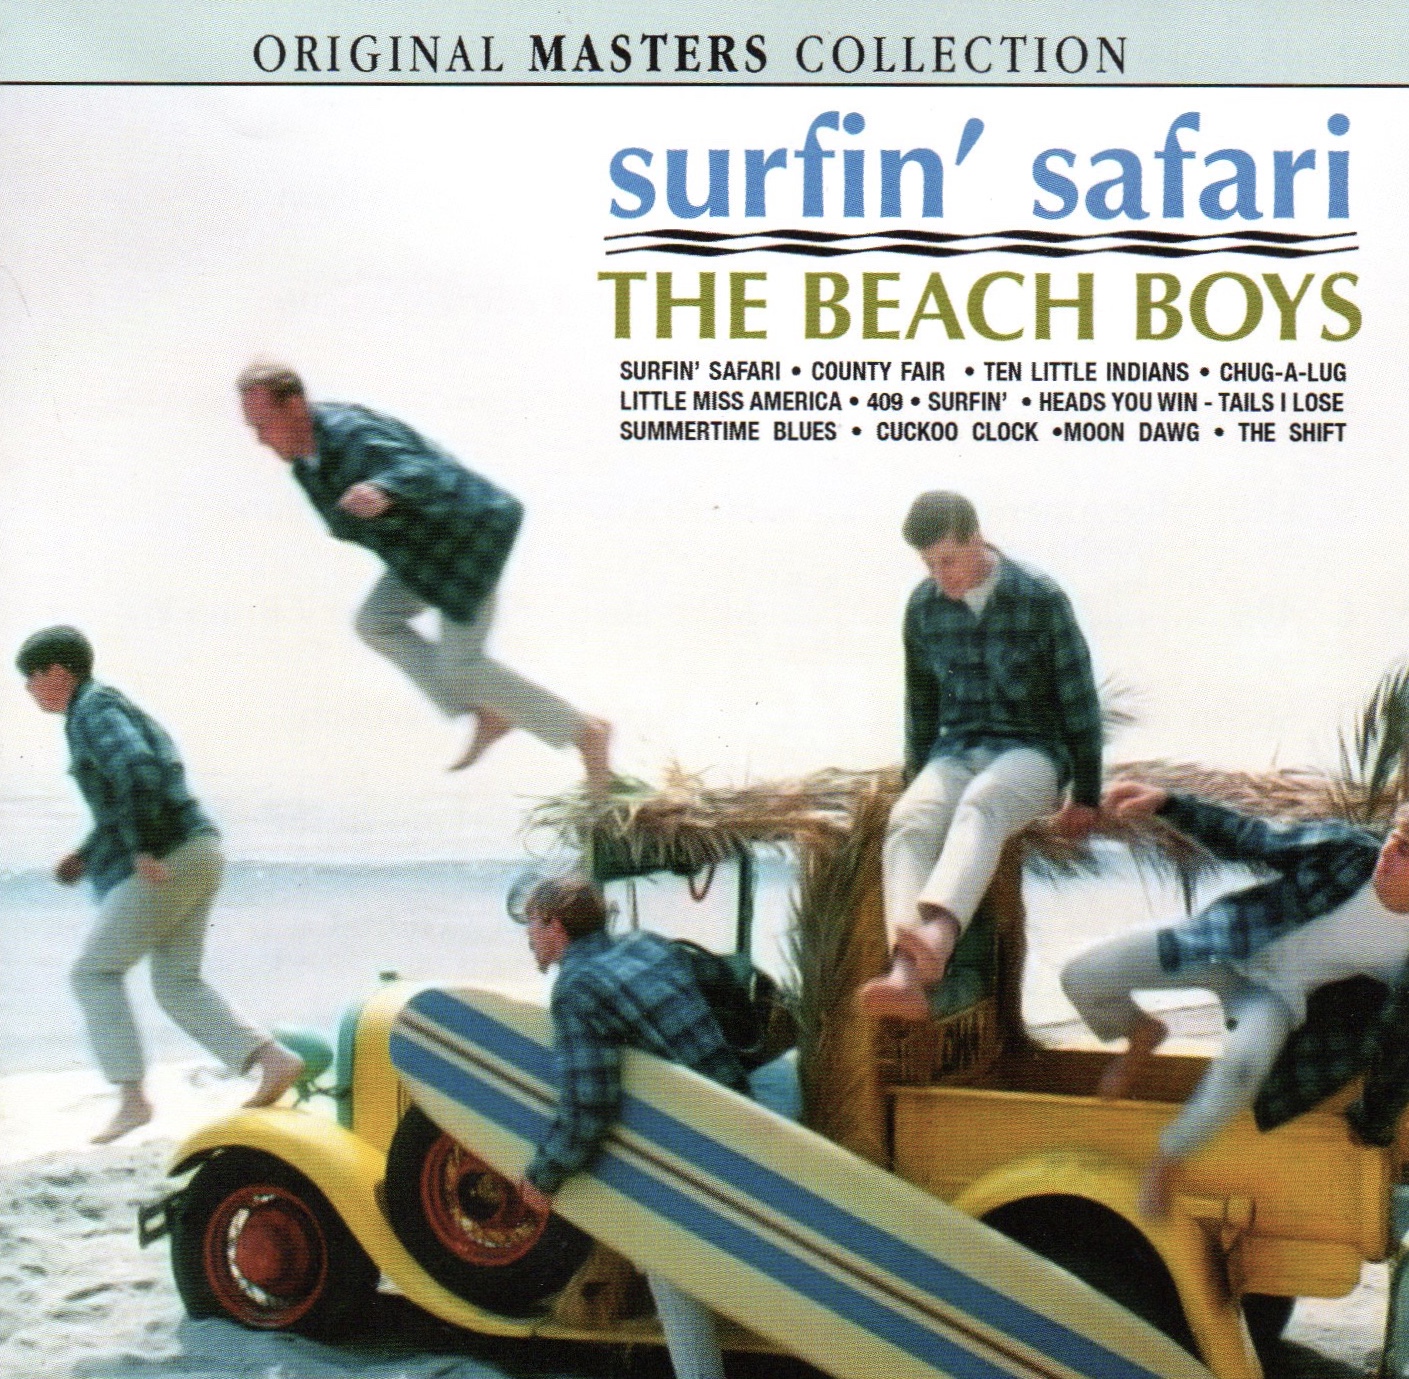 The Beach Boys 12x12 inch poster classic Surfin Safari pick-up with surfboa...